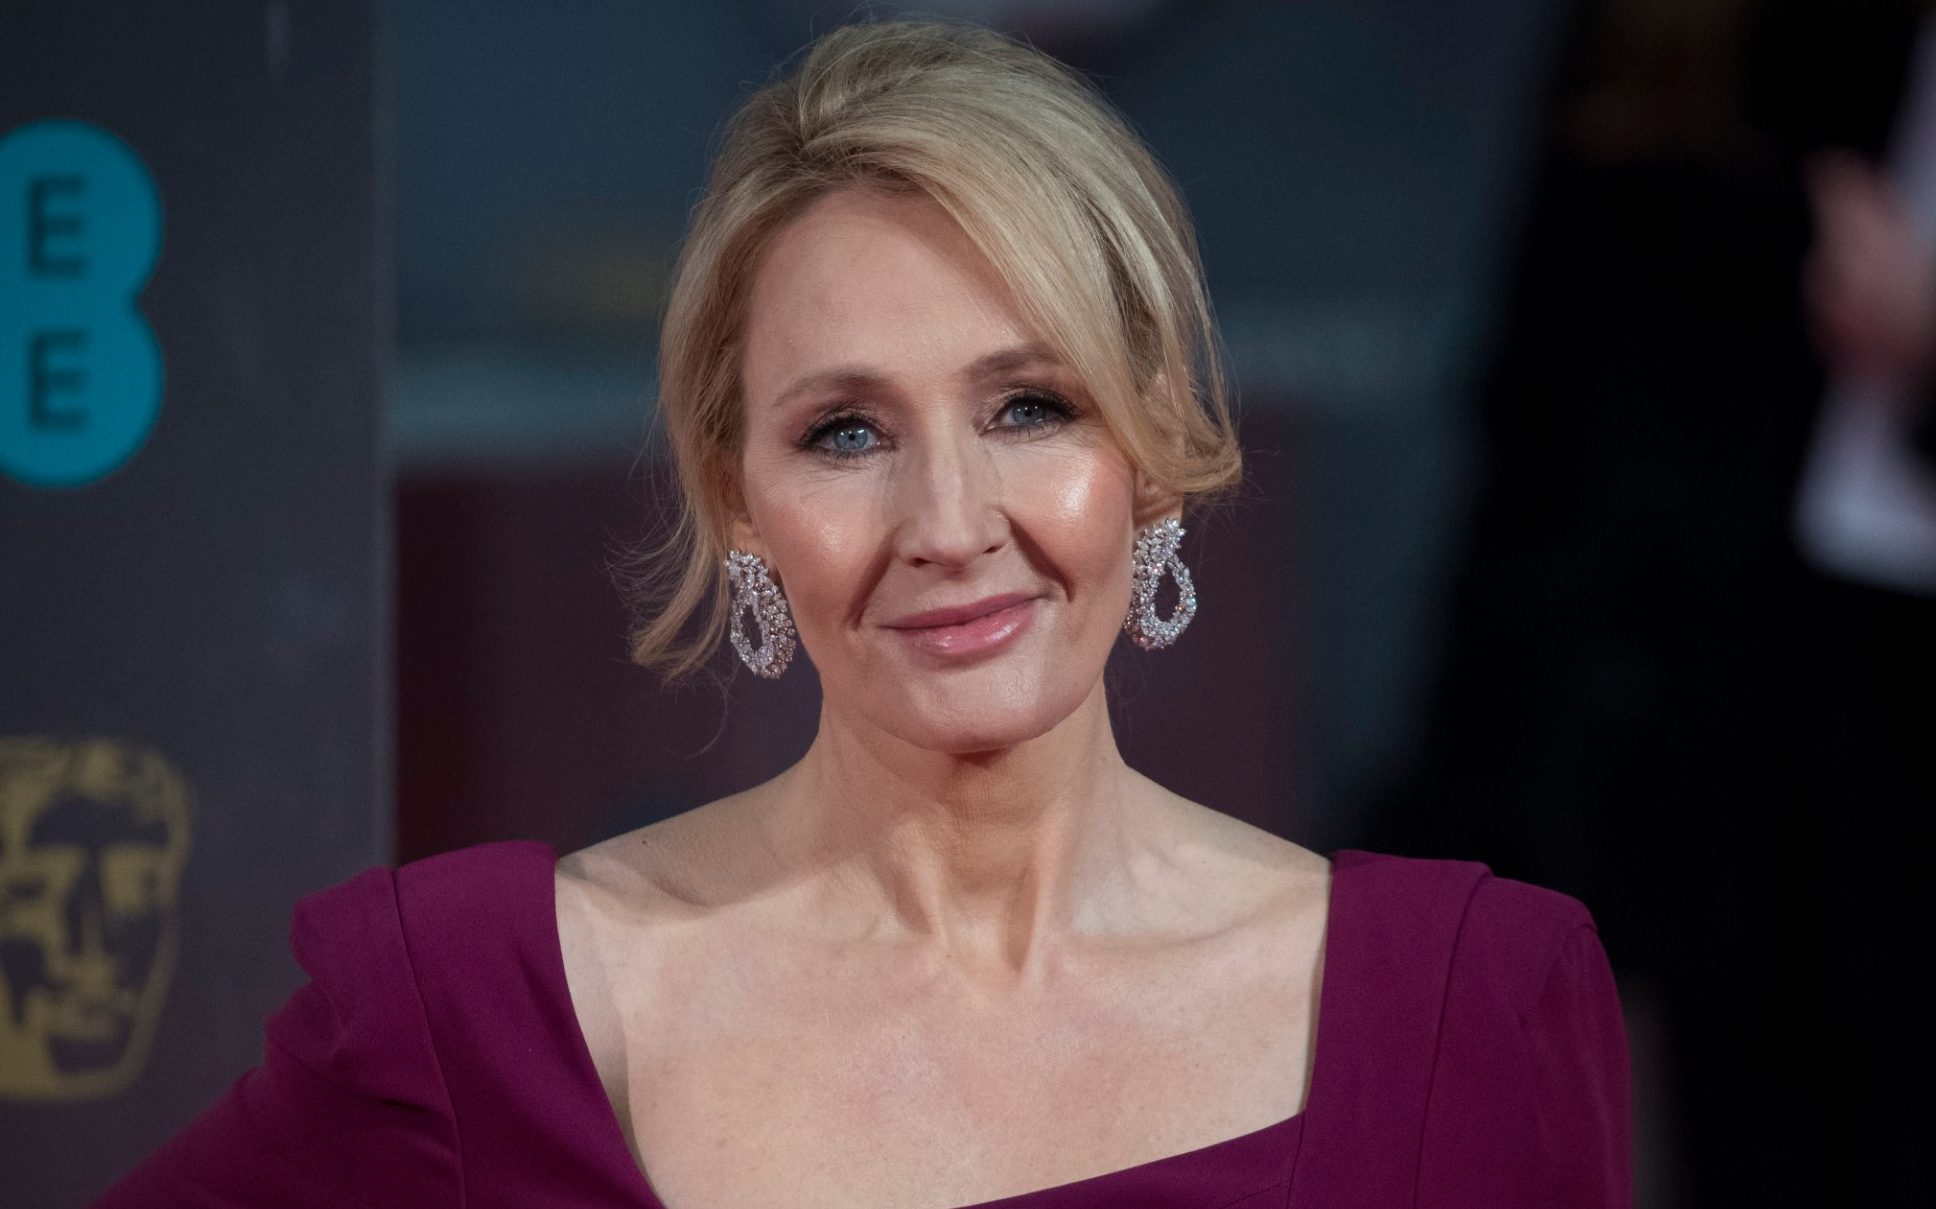 jk rowling: it is baseless and disgusting to claim i am a holocaust denier